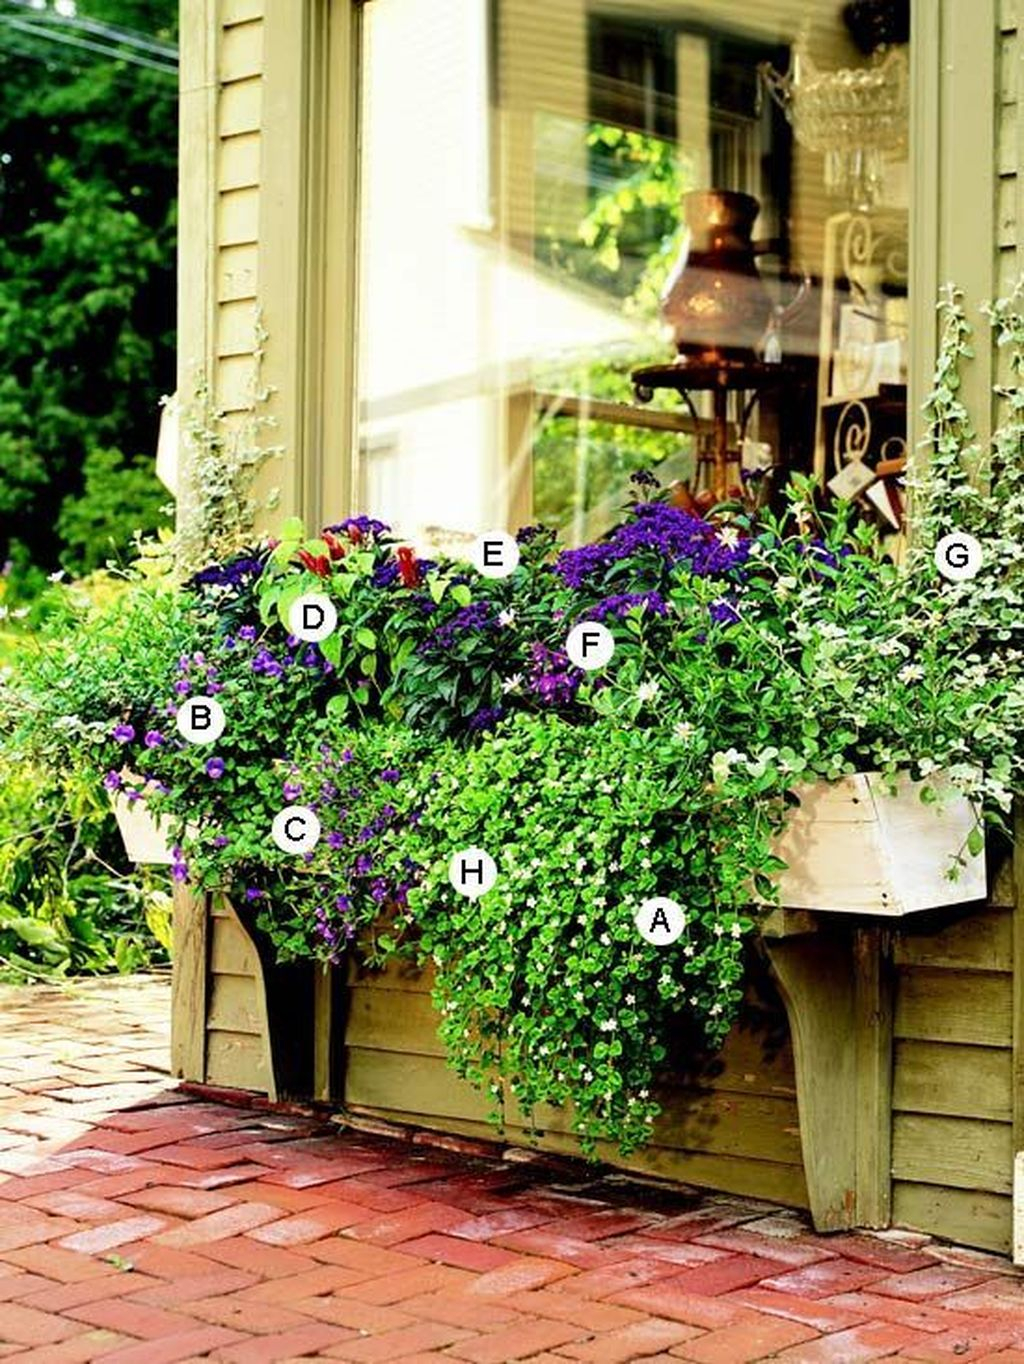 Amazing Windows Flower Boxes Design Ideas Must See33